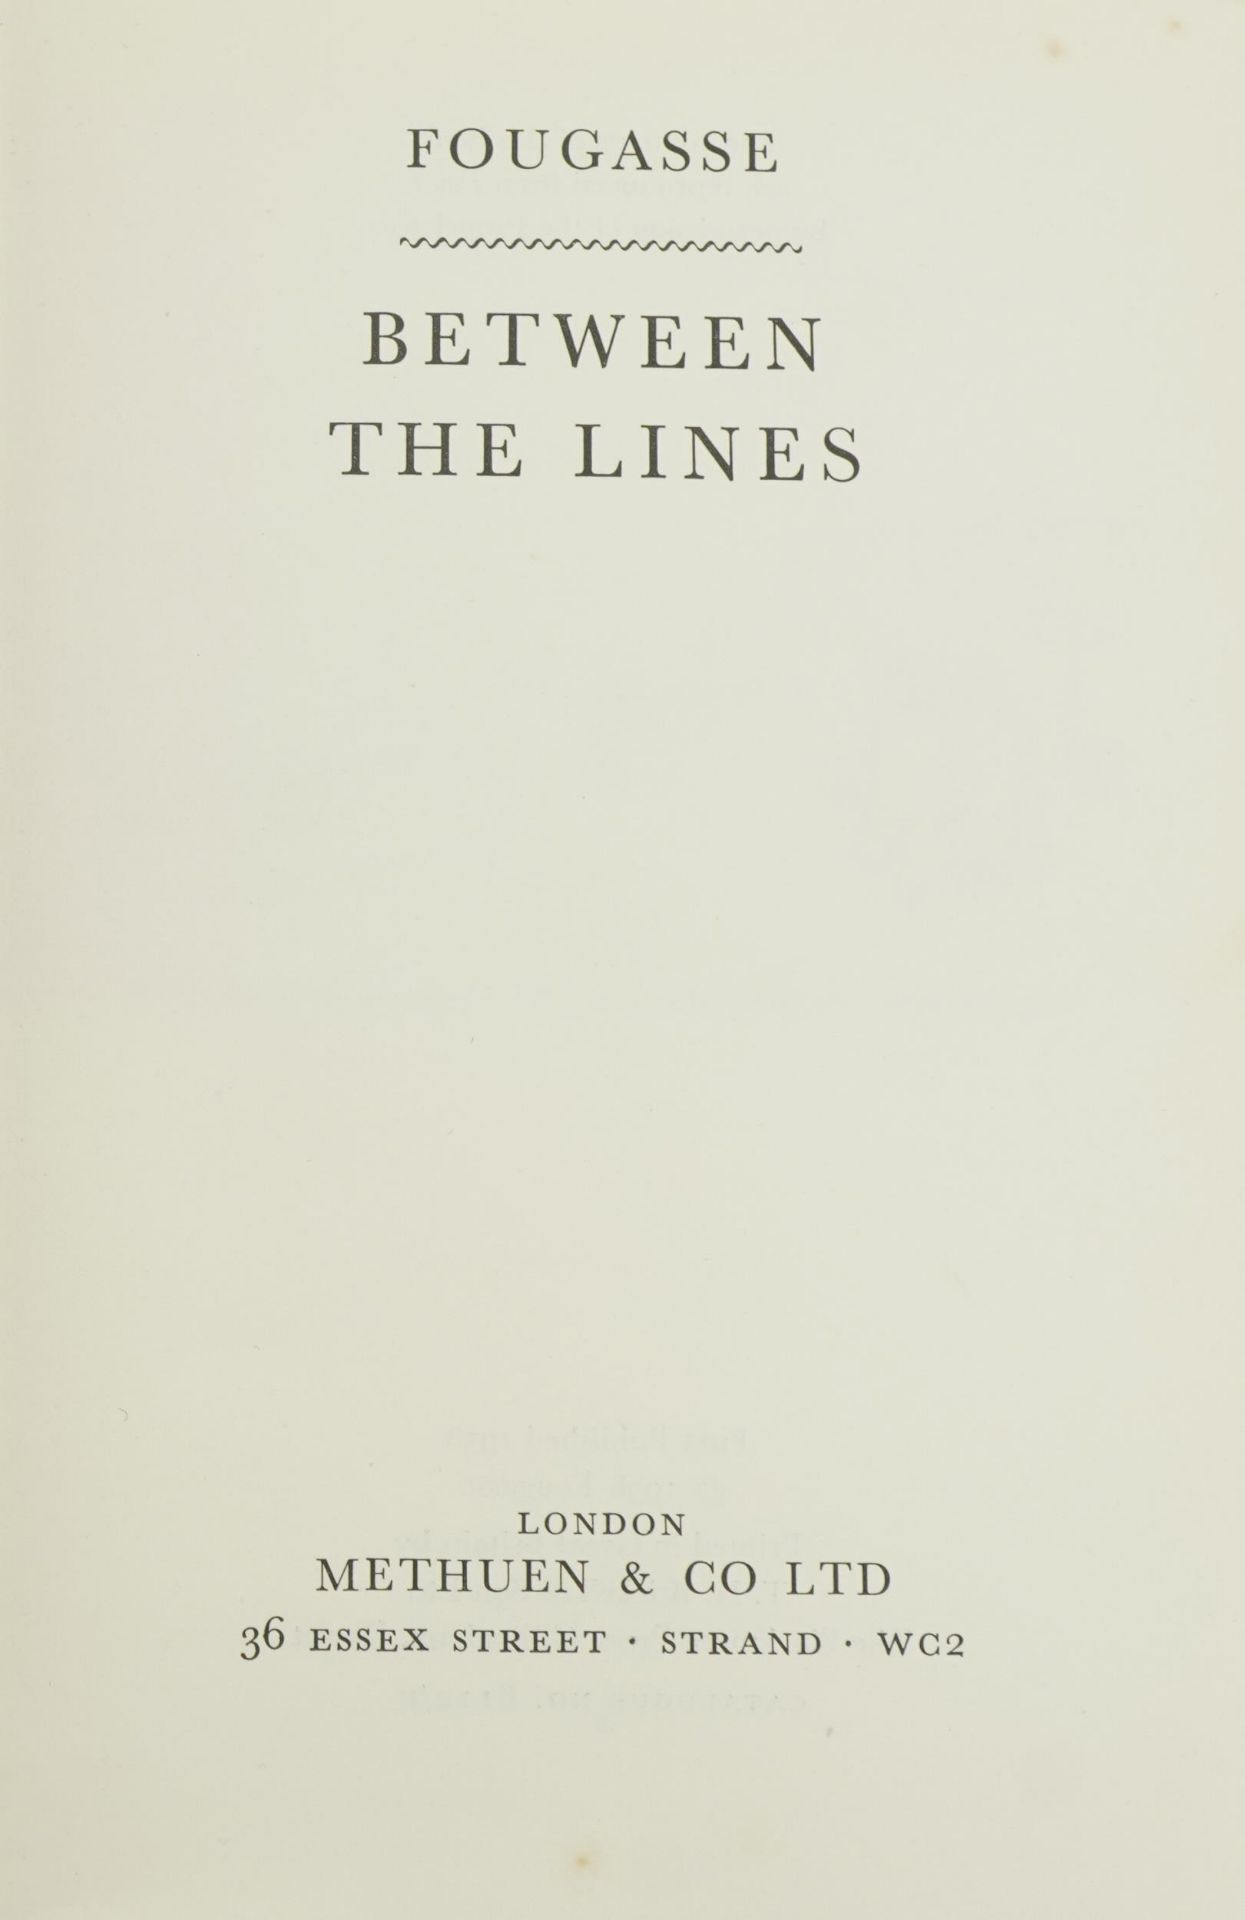 Between the Lines by Forgasse, London Methuen & Co Ltd 1958 : For further information on this lot - Image 2 of 5